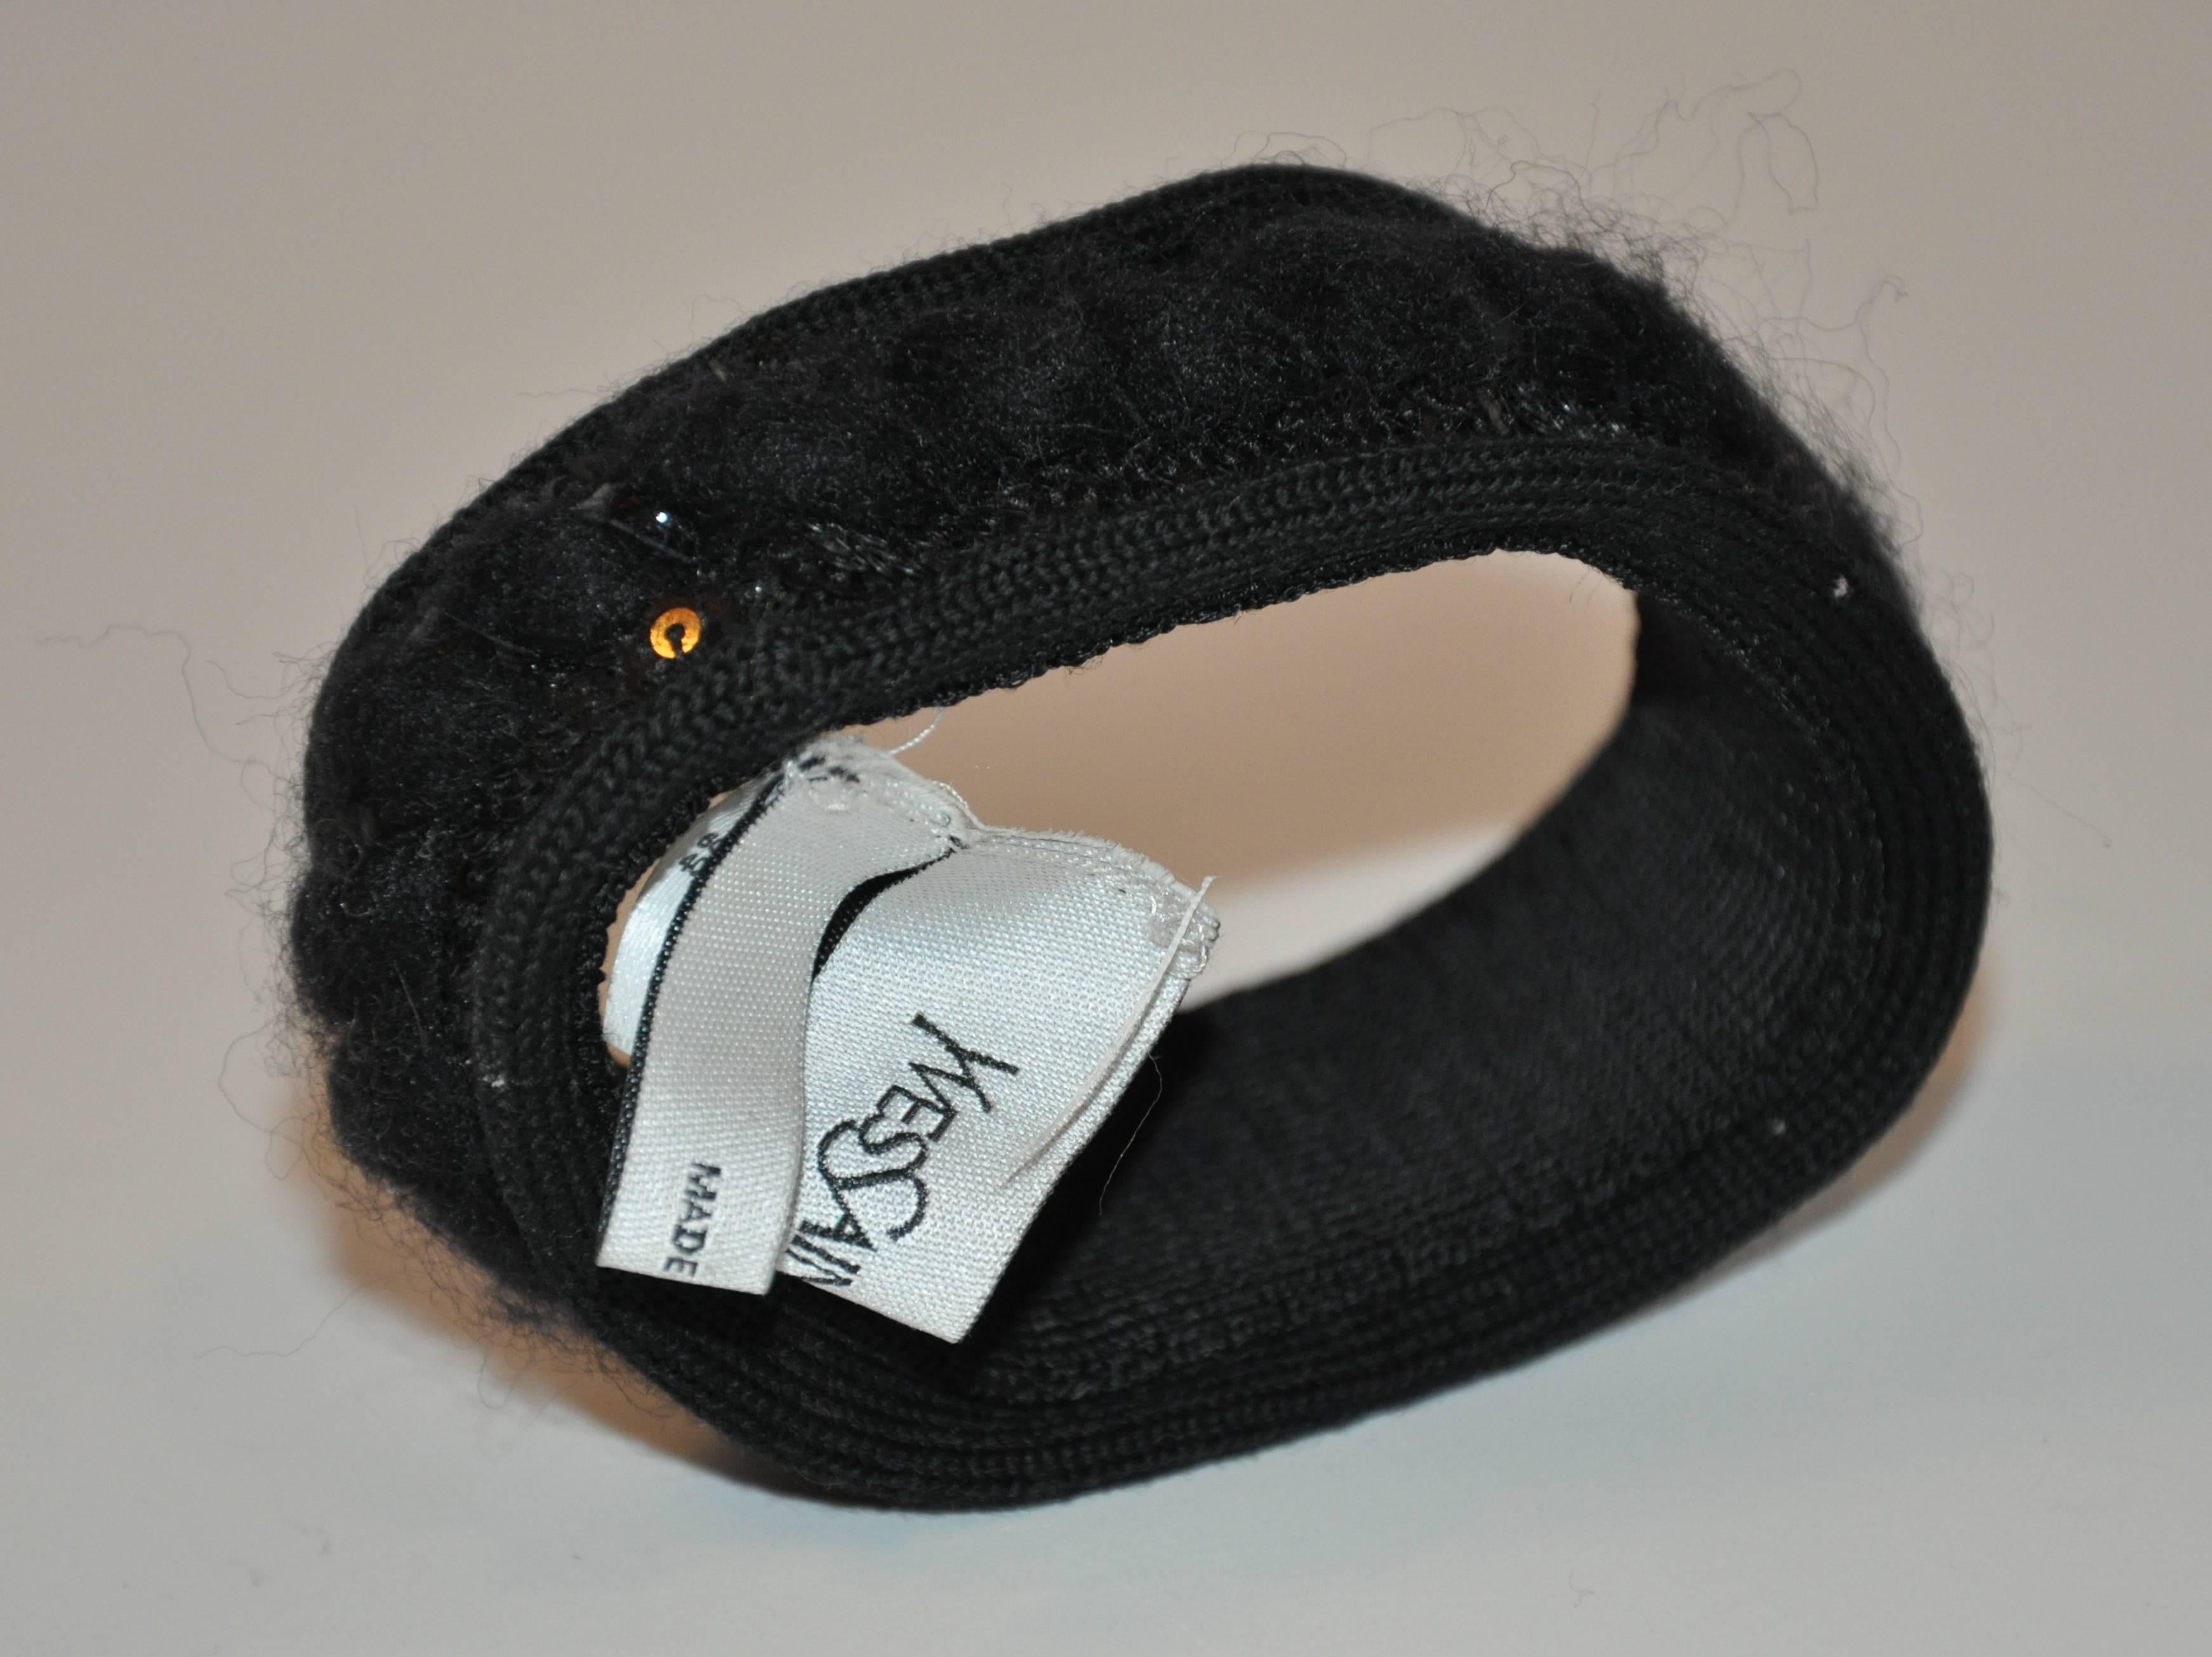 Yves Saint Laurent Black Hand-Woven & Sequins Bracelet In Good Condition For Sale In New York, NY